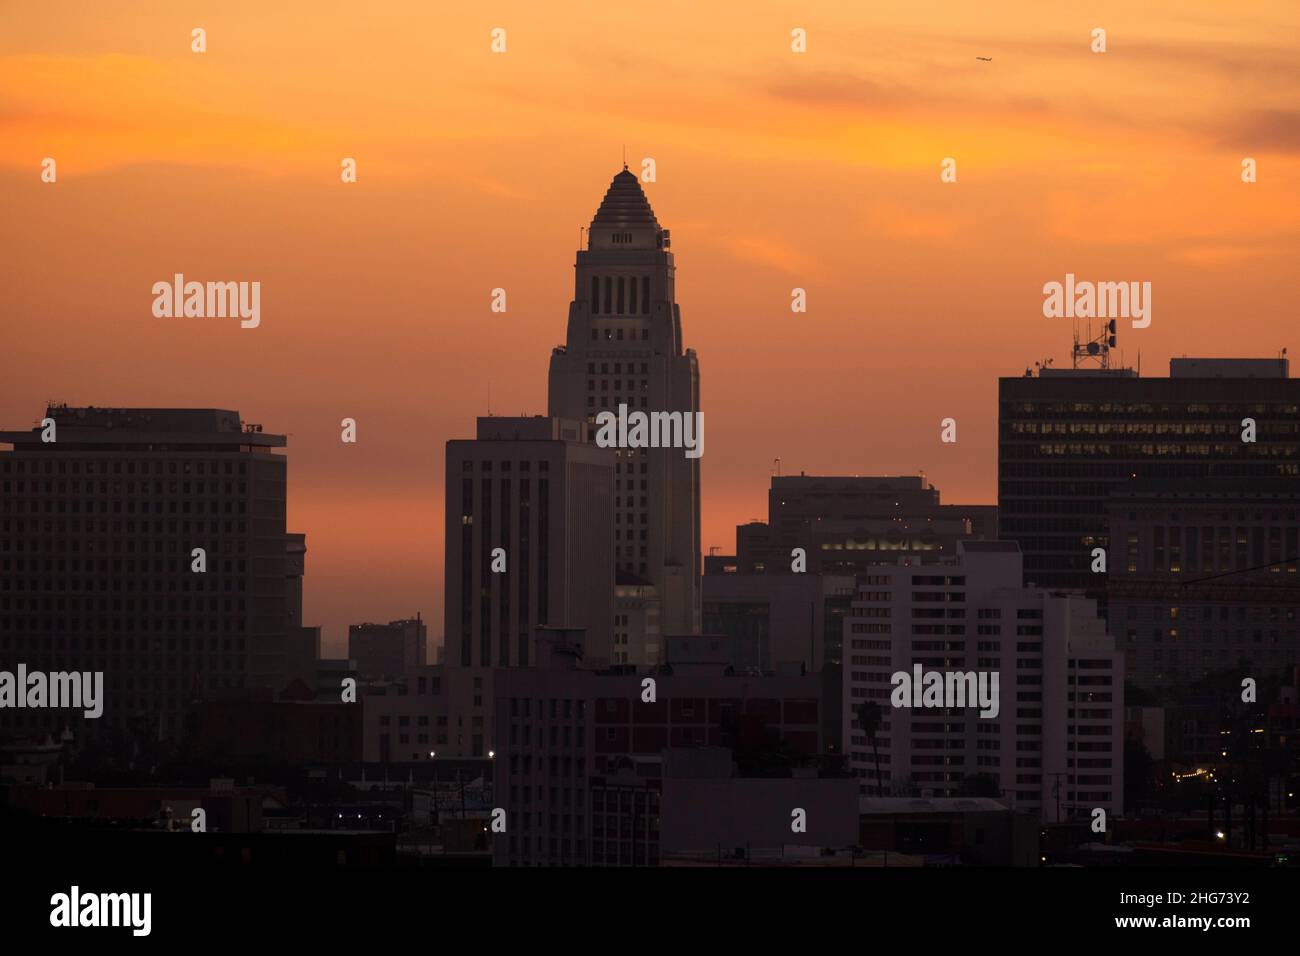 Iconic view of Los Angeles City Hall building at sunset Stock Photo